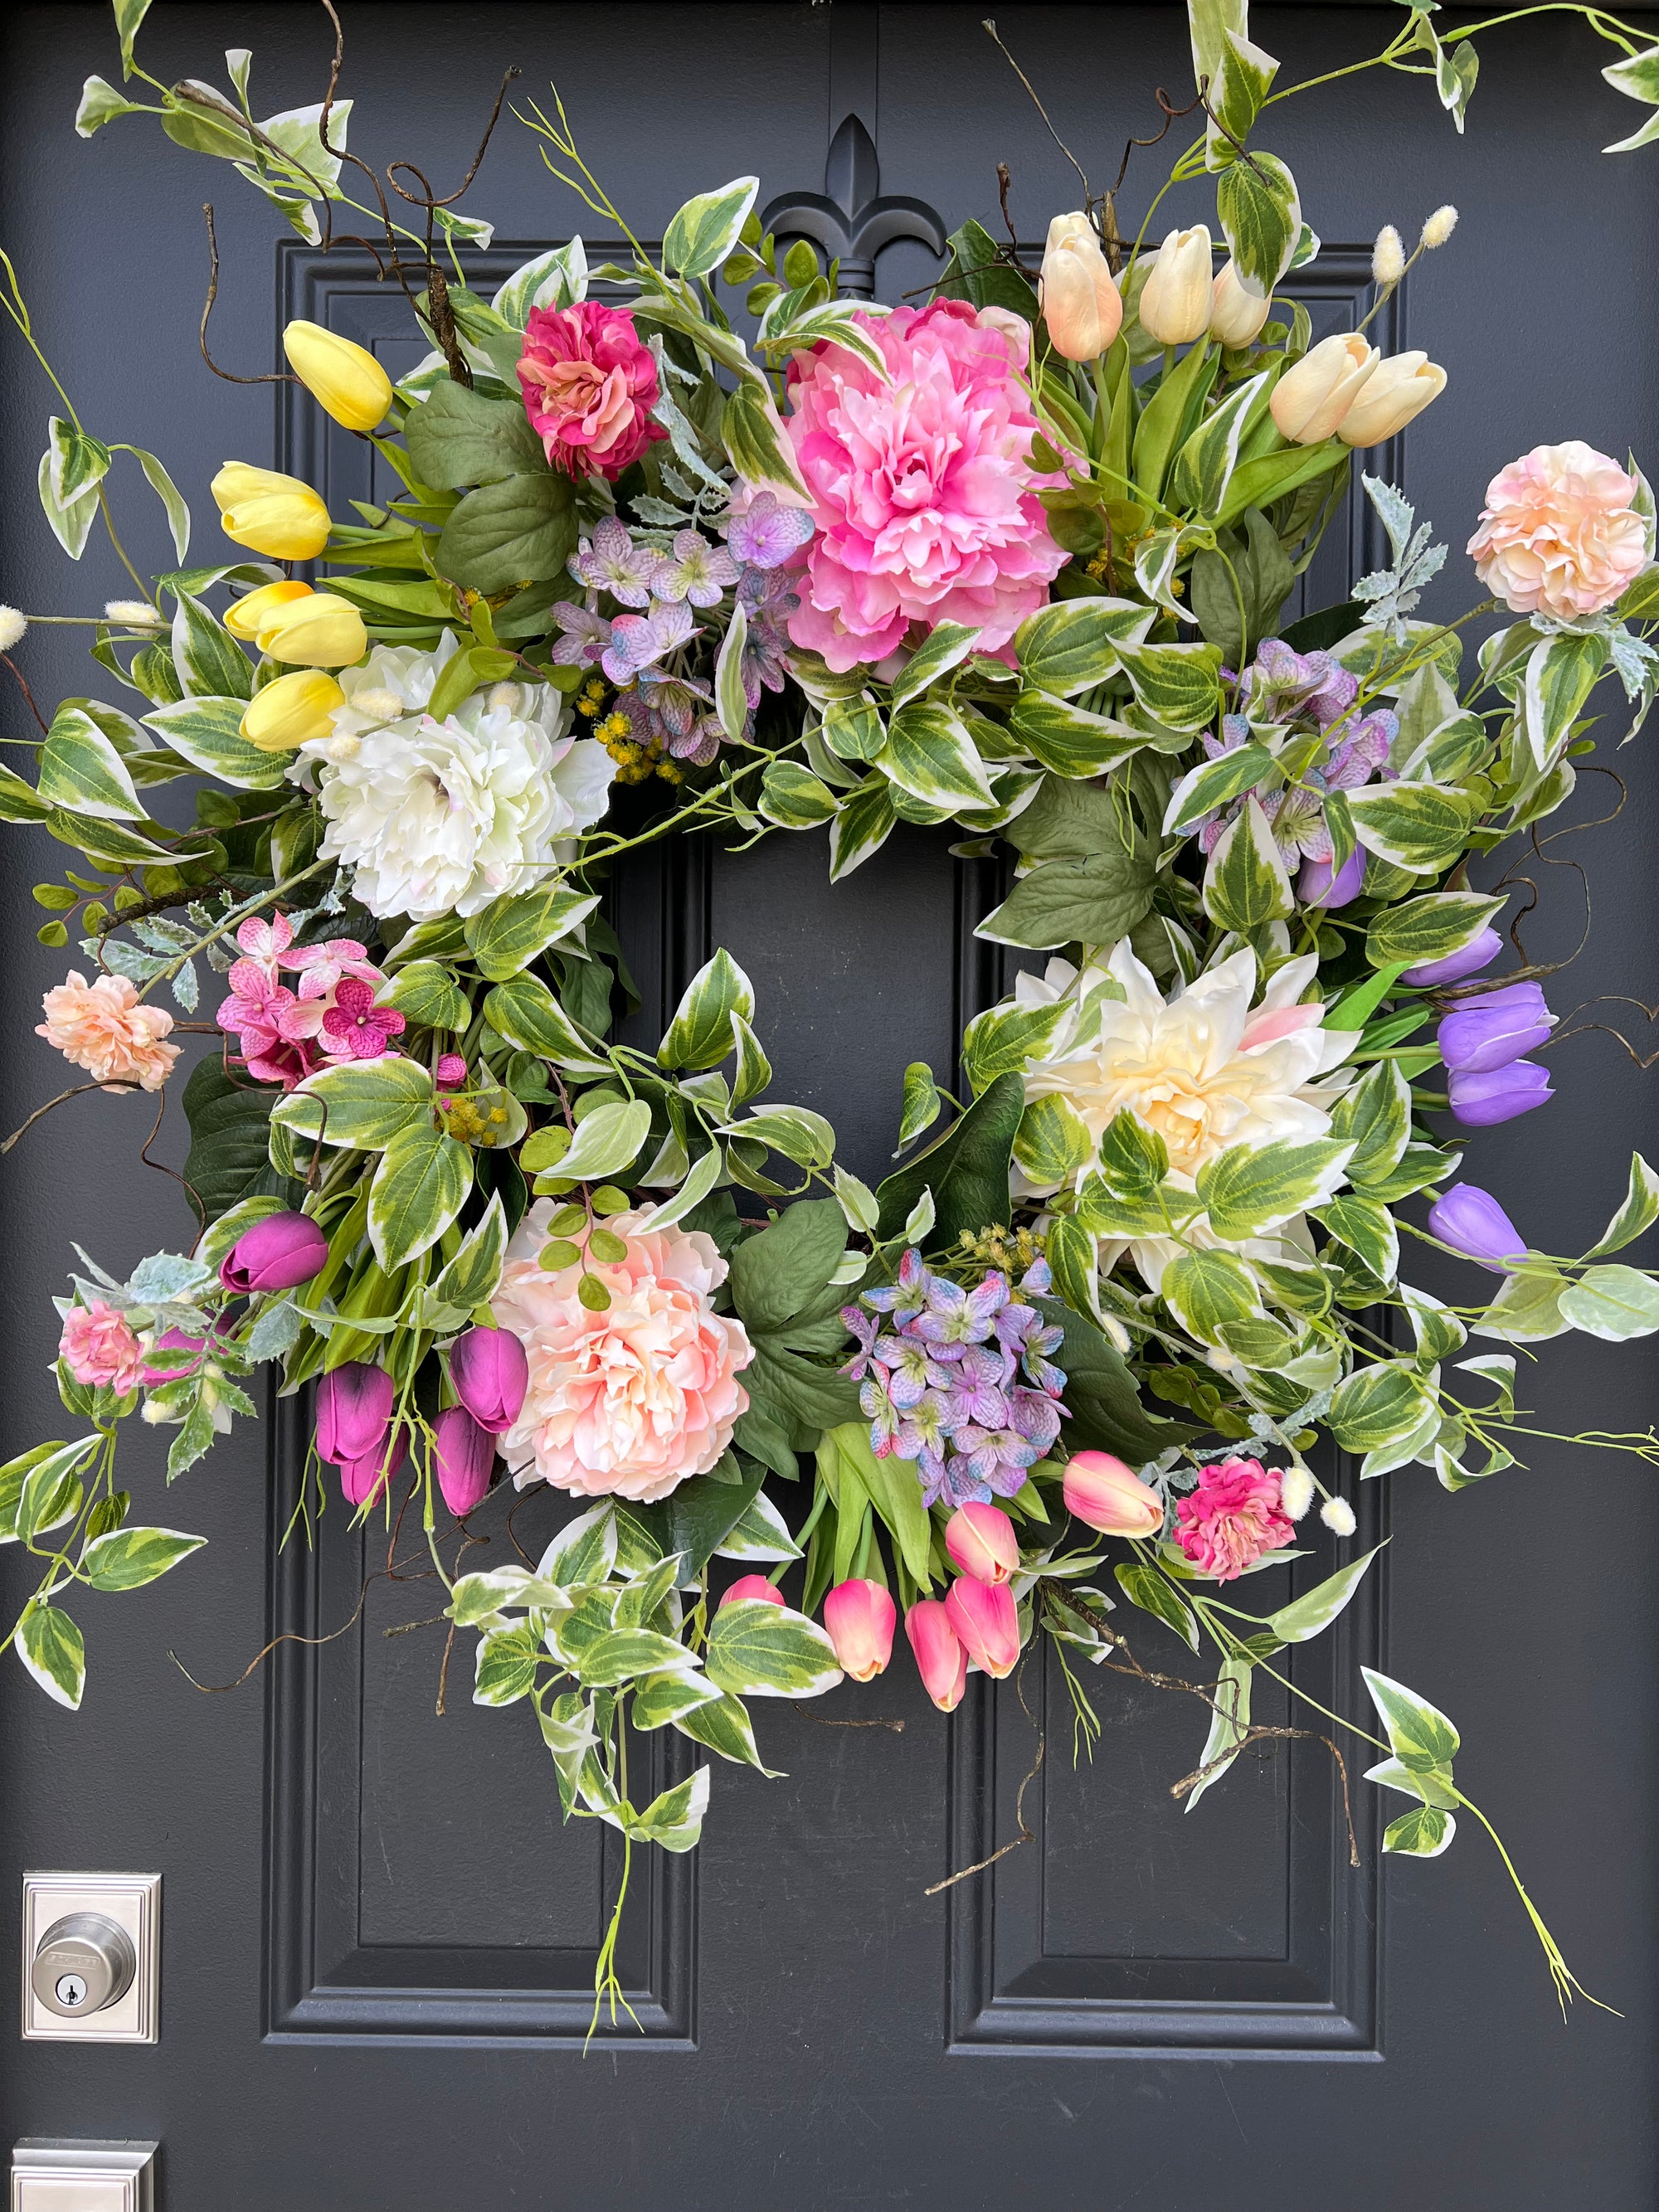 The Mother's Day Wreath